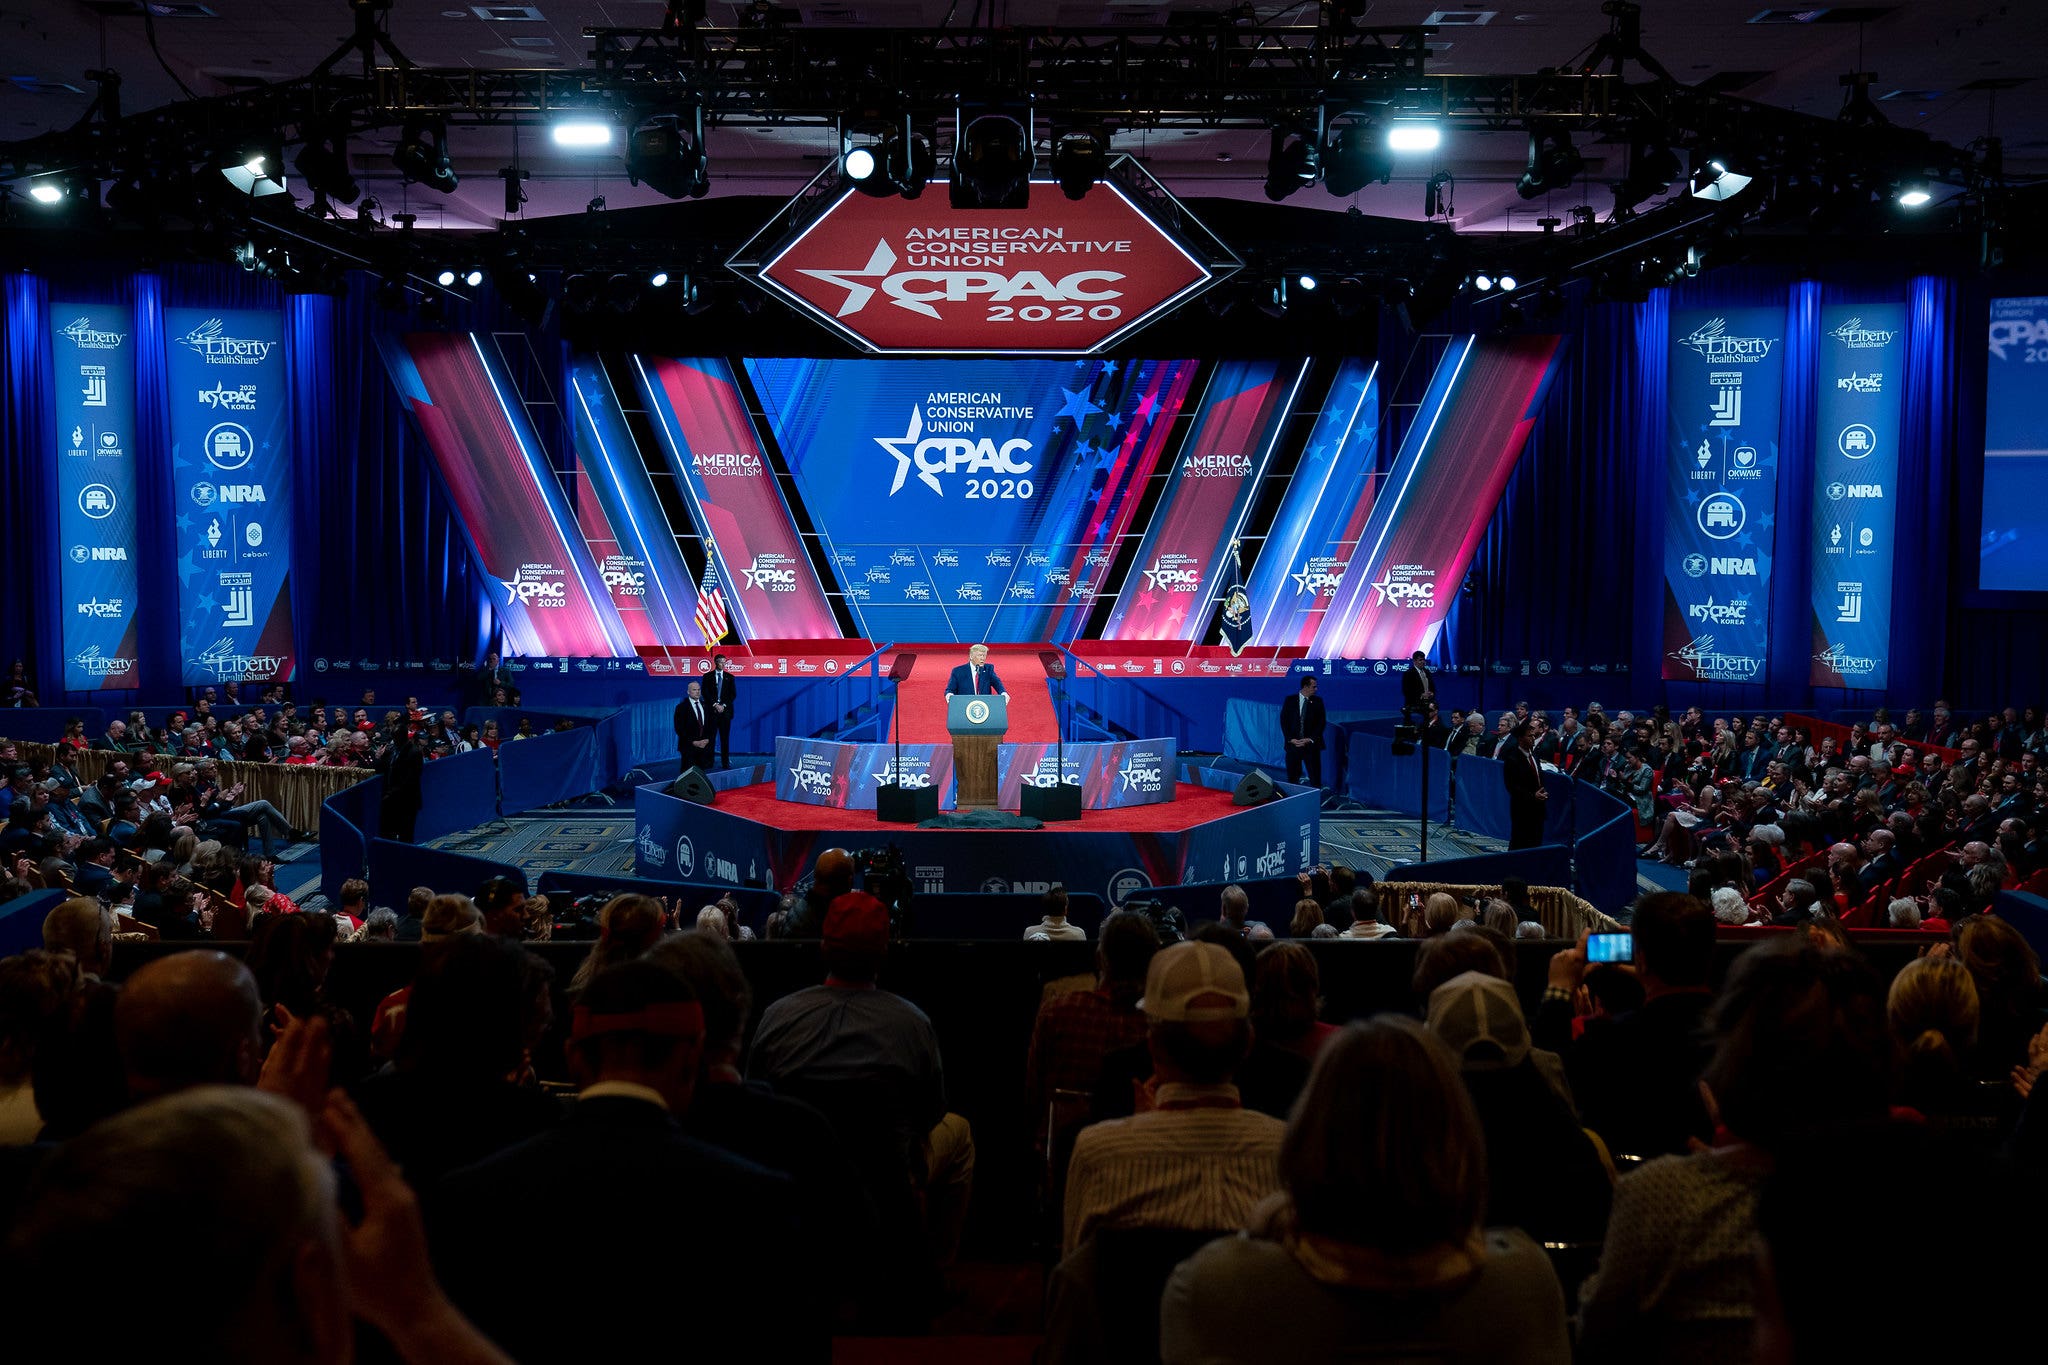 CPAC organizers accuse Politico of trying to ‘cancel’ conservative